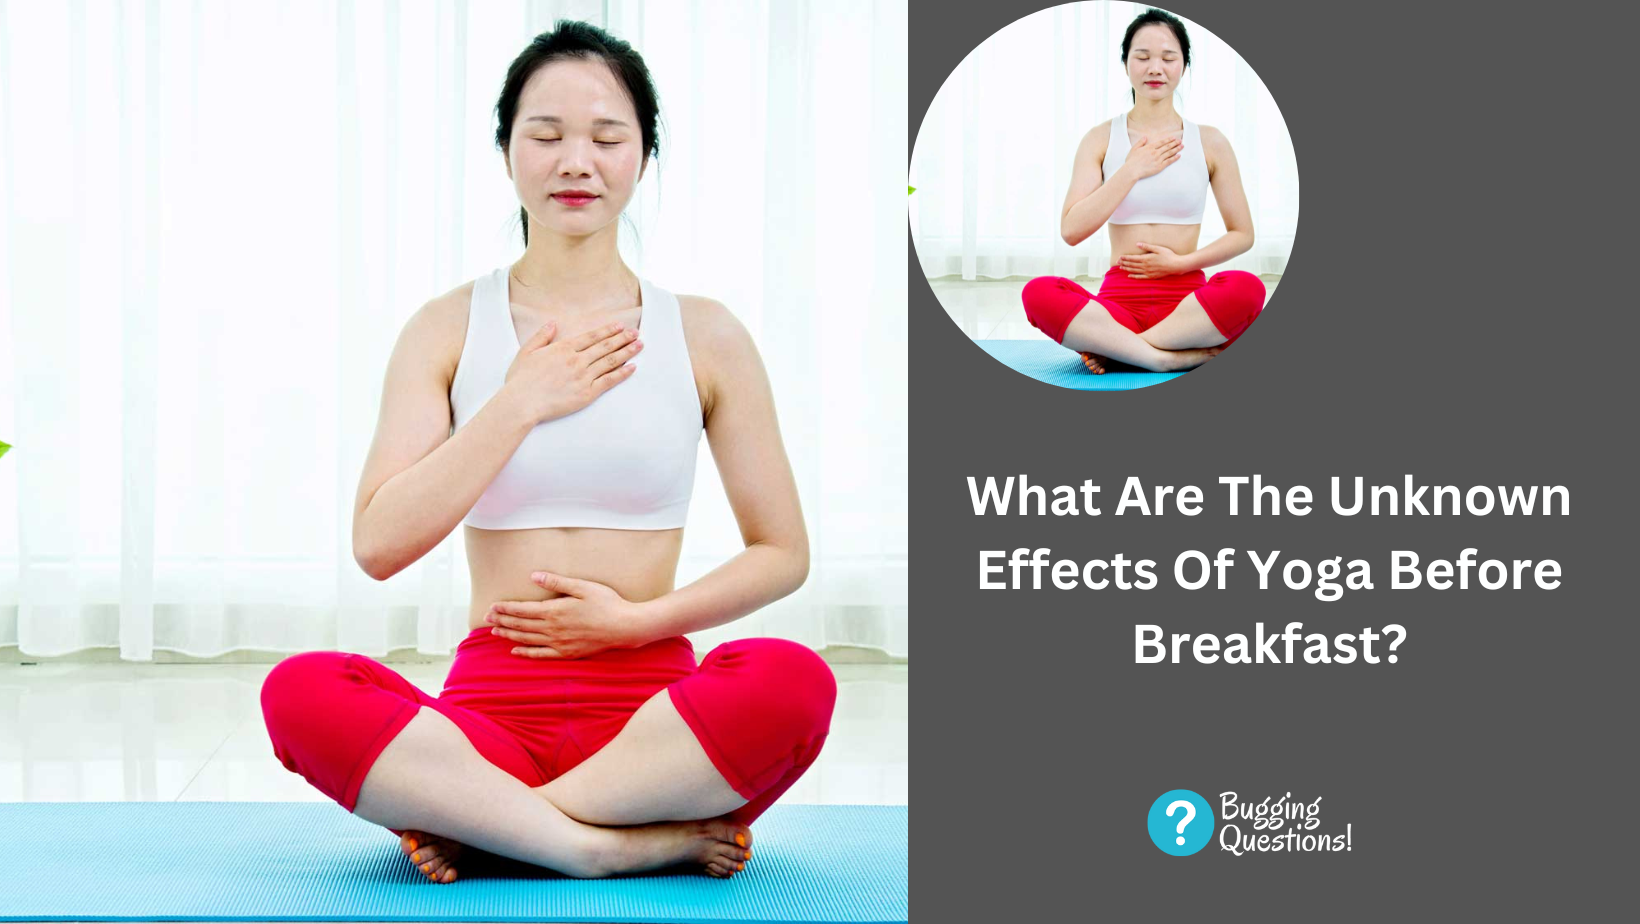 What Are The Unknown Effects Of Yoga Before Breakfast?